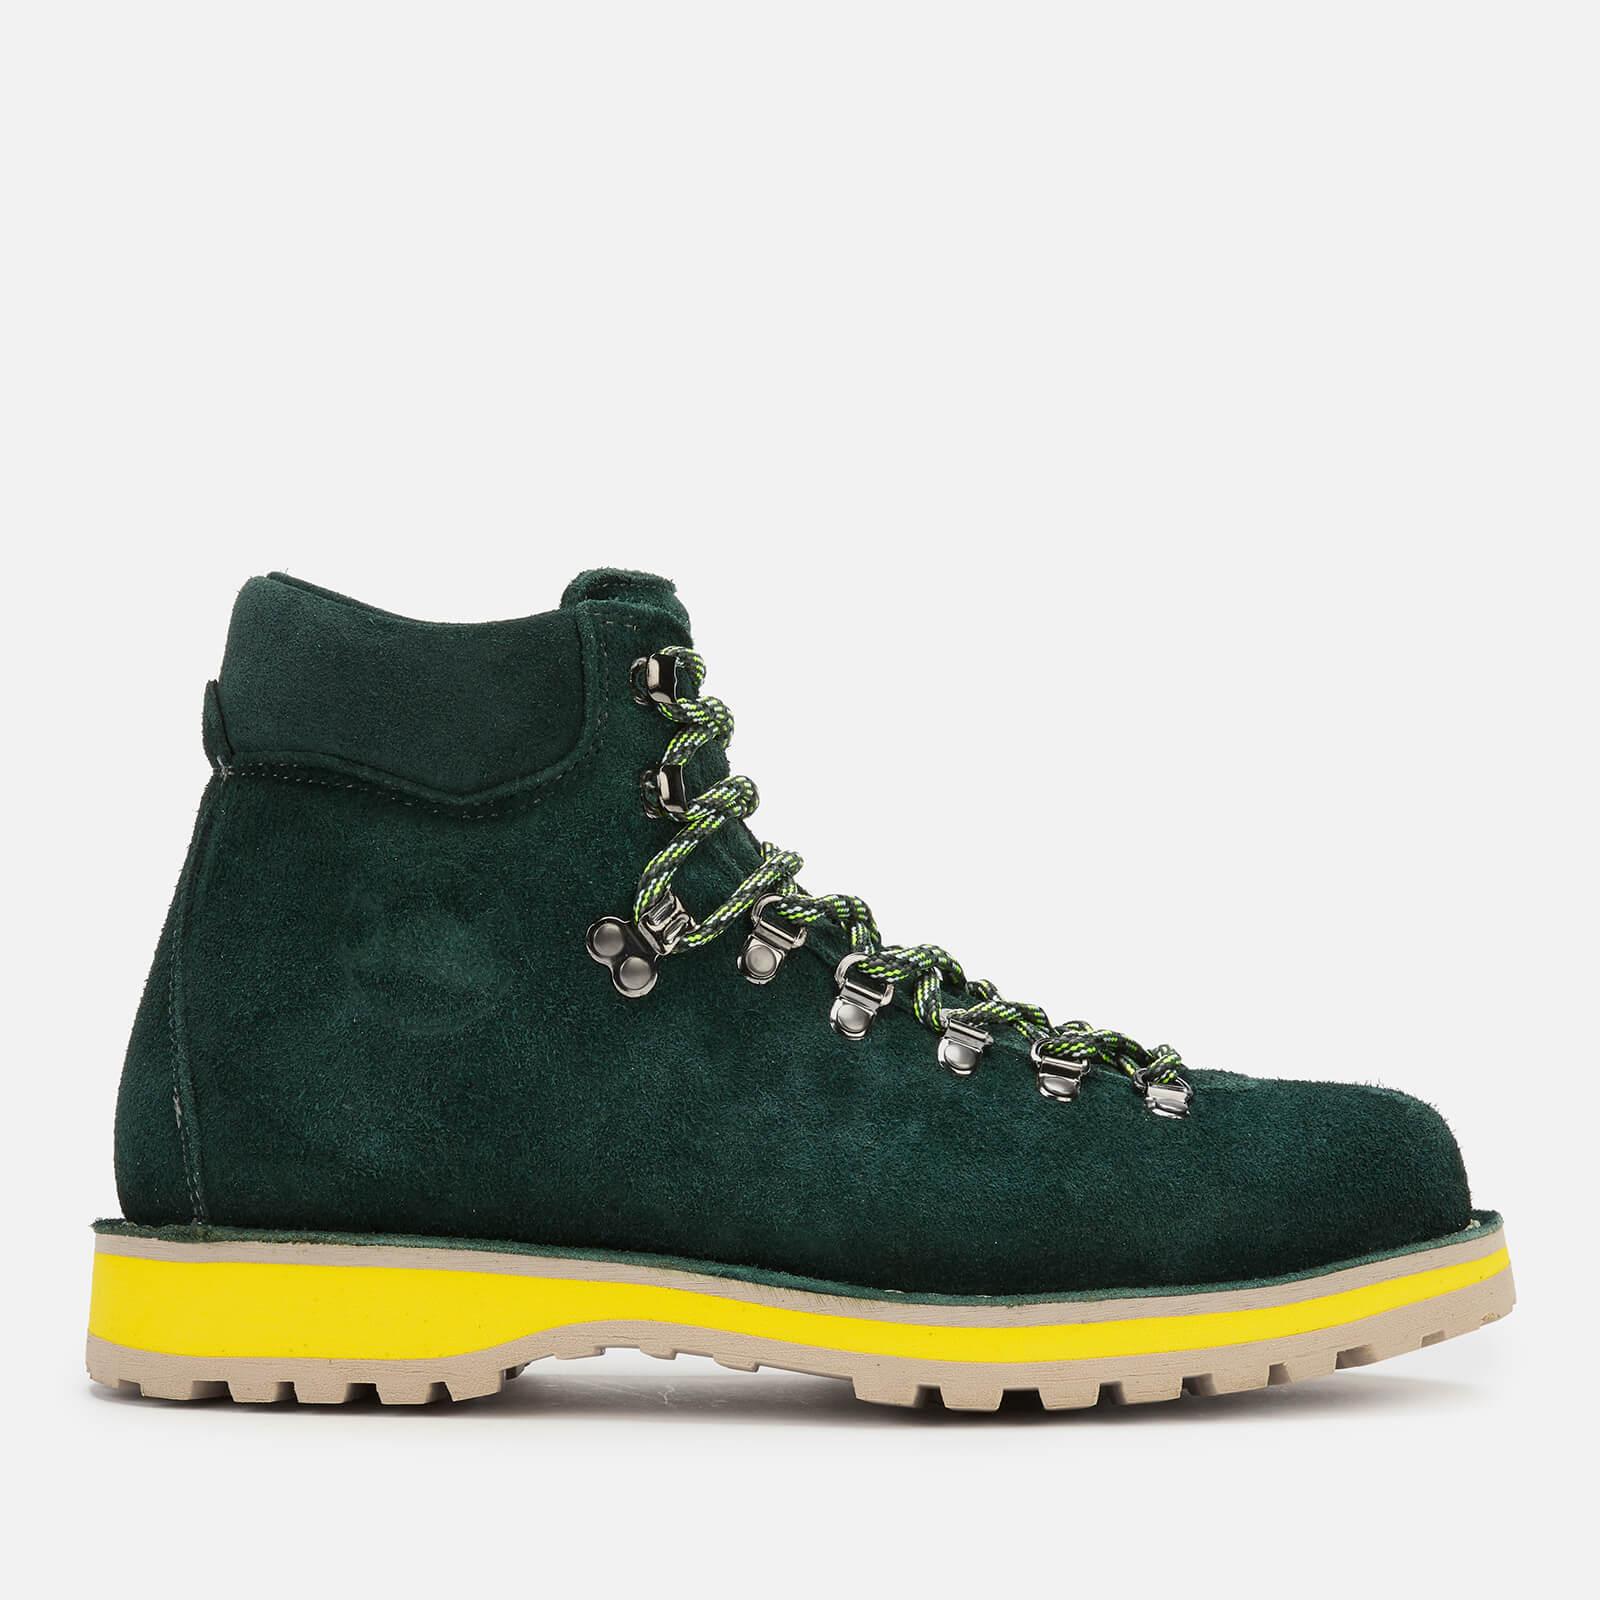 Diemme Roccia Vet Suede Hiking Style Boots in Green for Men - Lyst